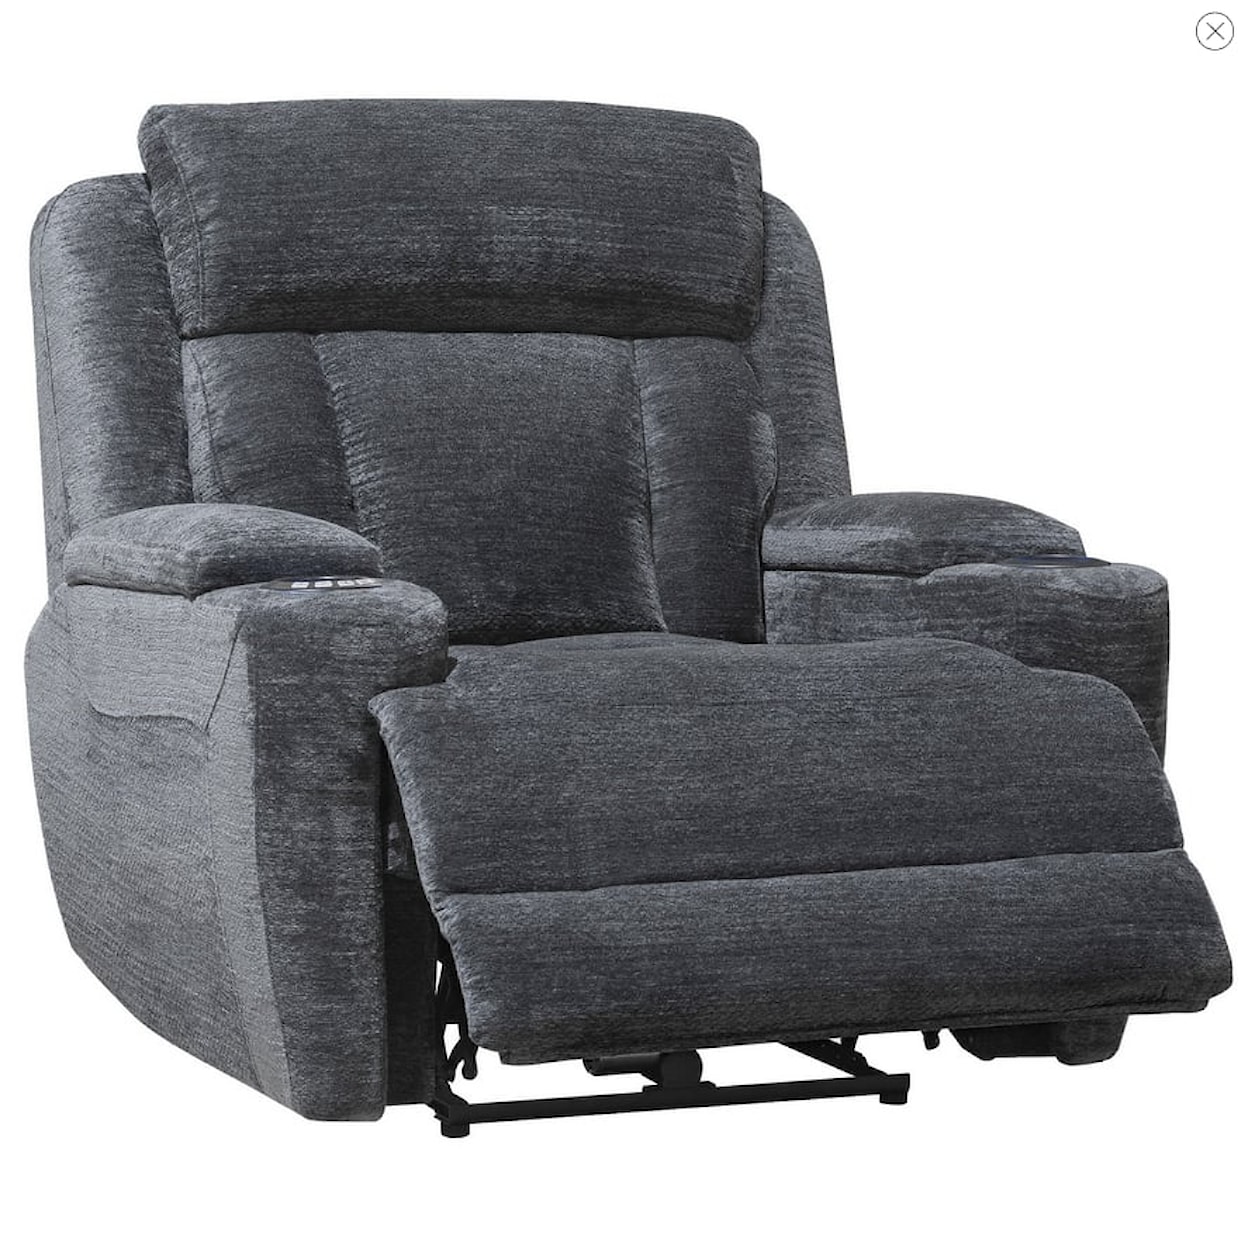 Parker Living Dalton Power Recliner with Power Headrest and USB